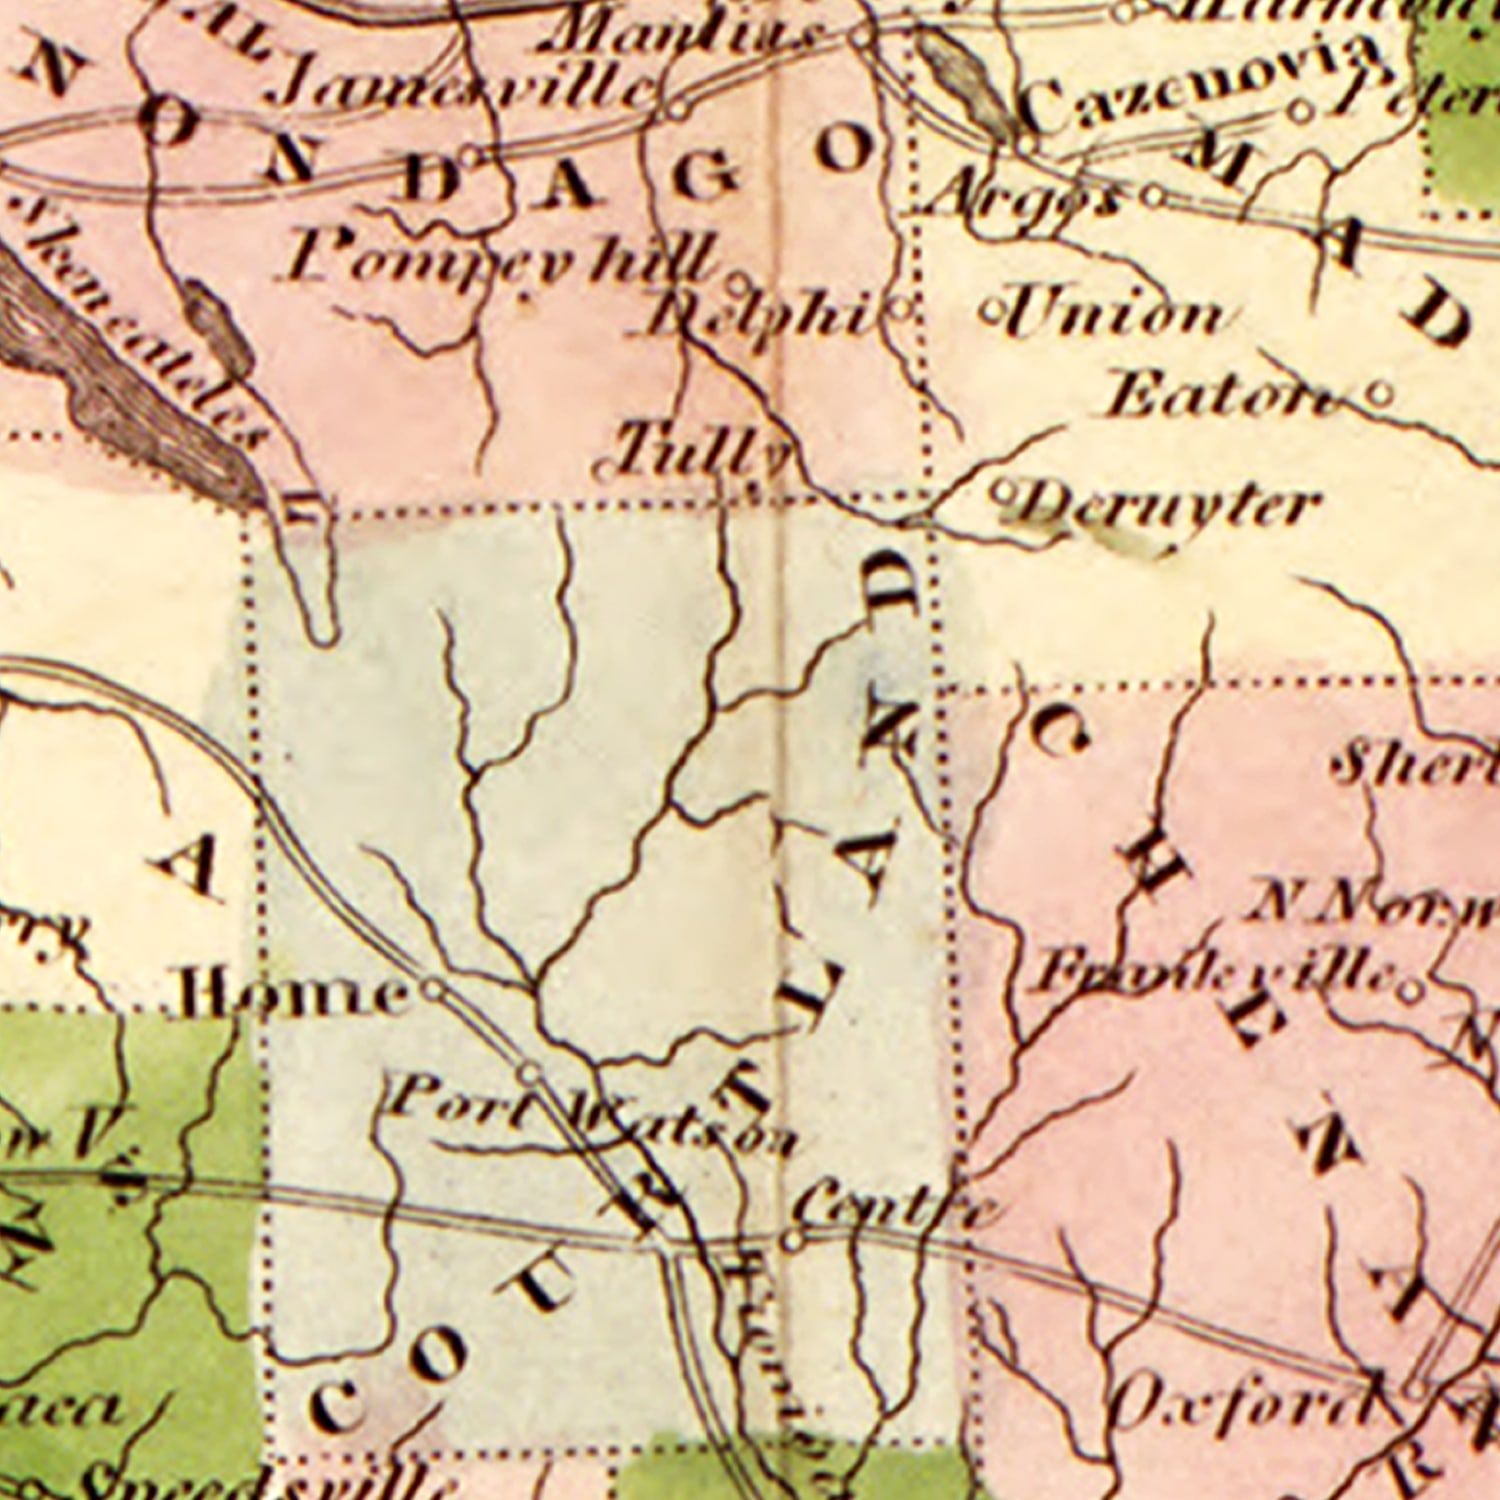 Vintage State Map of Louisiana 1833